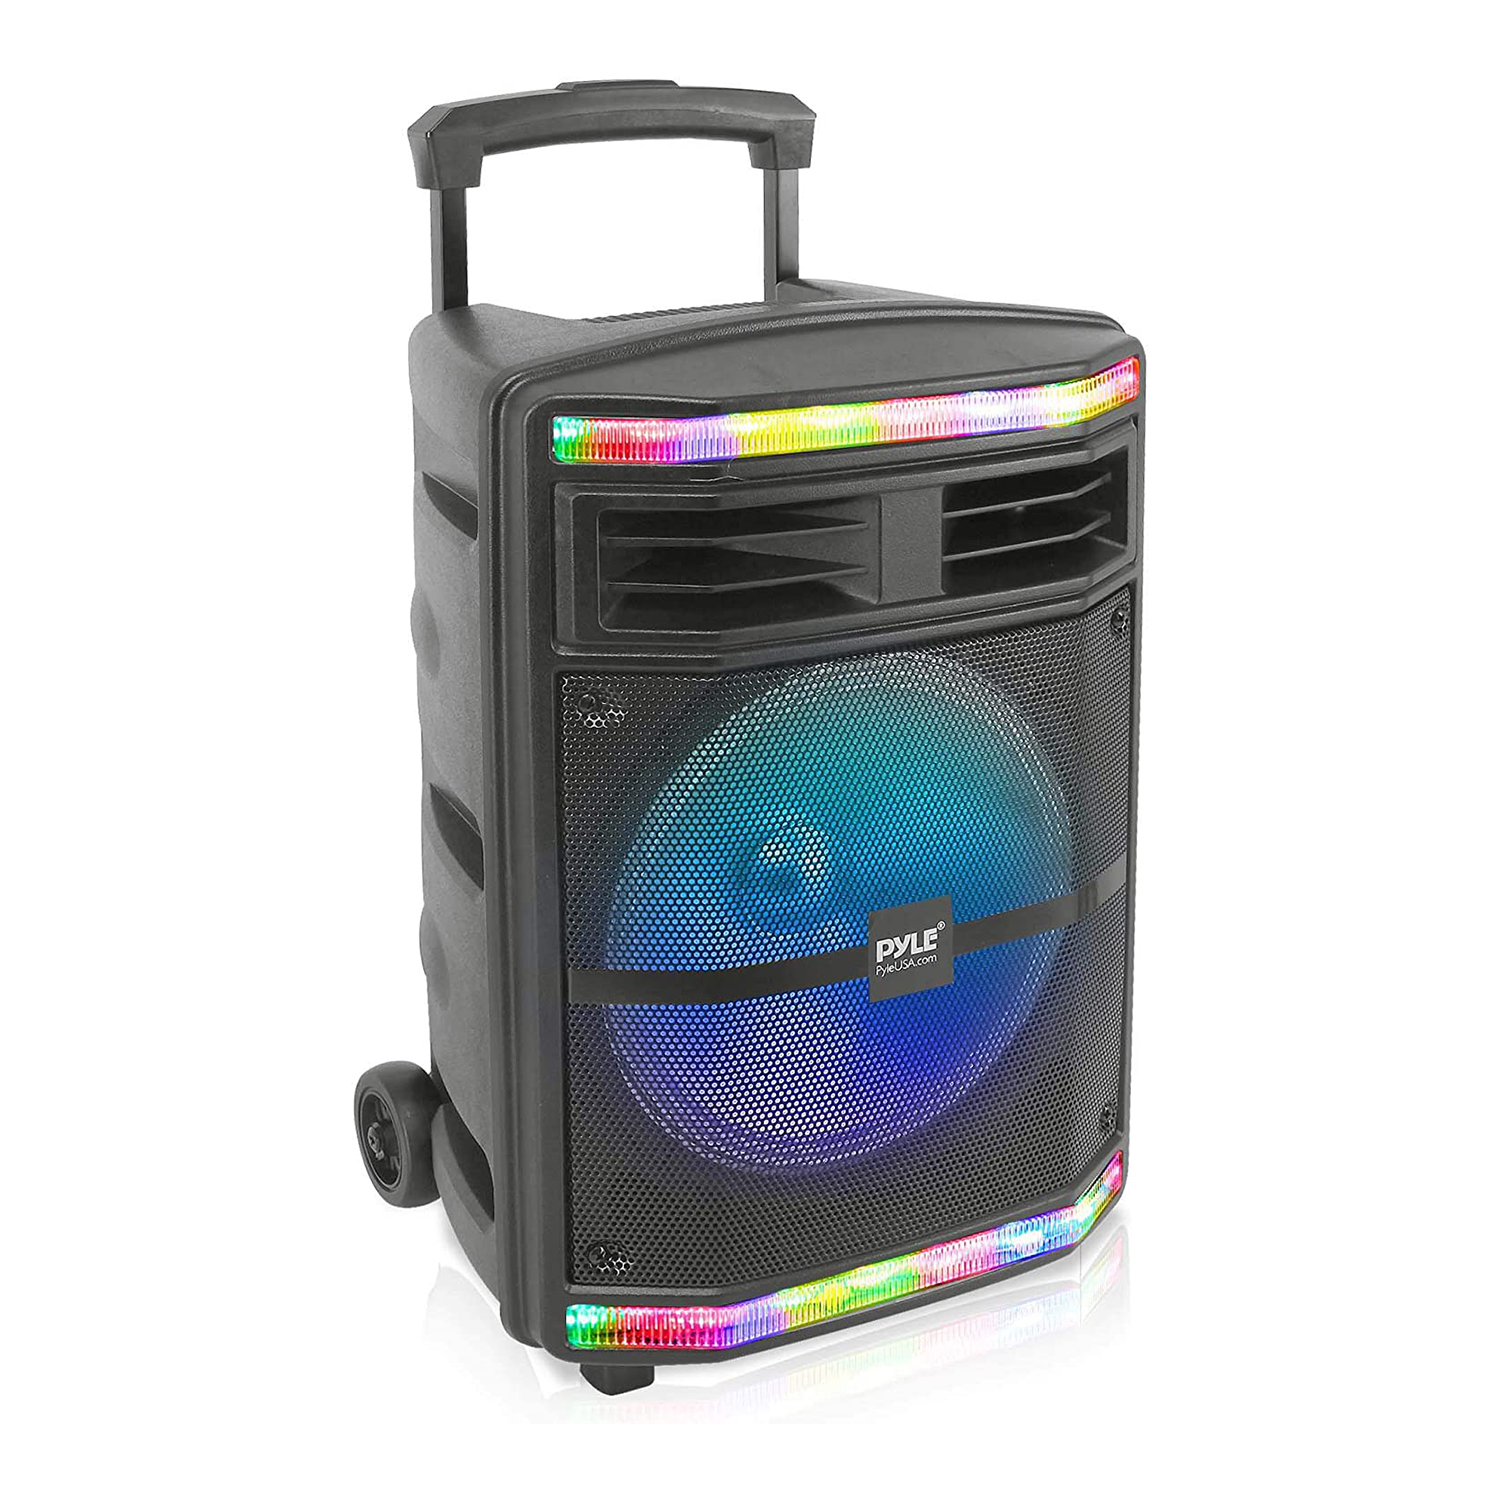 Pyle PPHP1044B Portable Bluetooth Speaker System with Flashing Party Lights - image 1 of 7